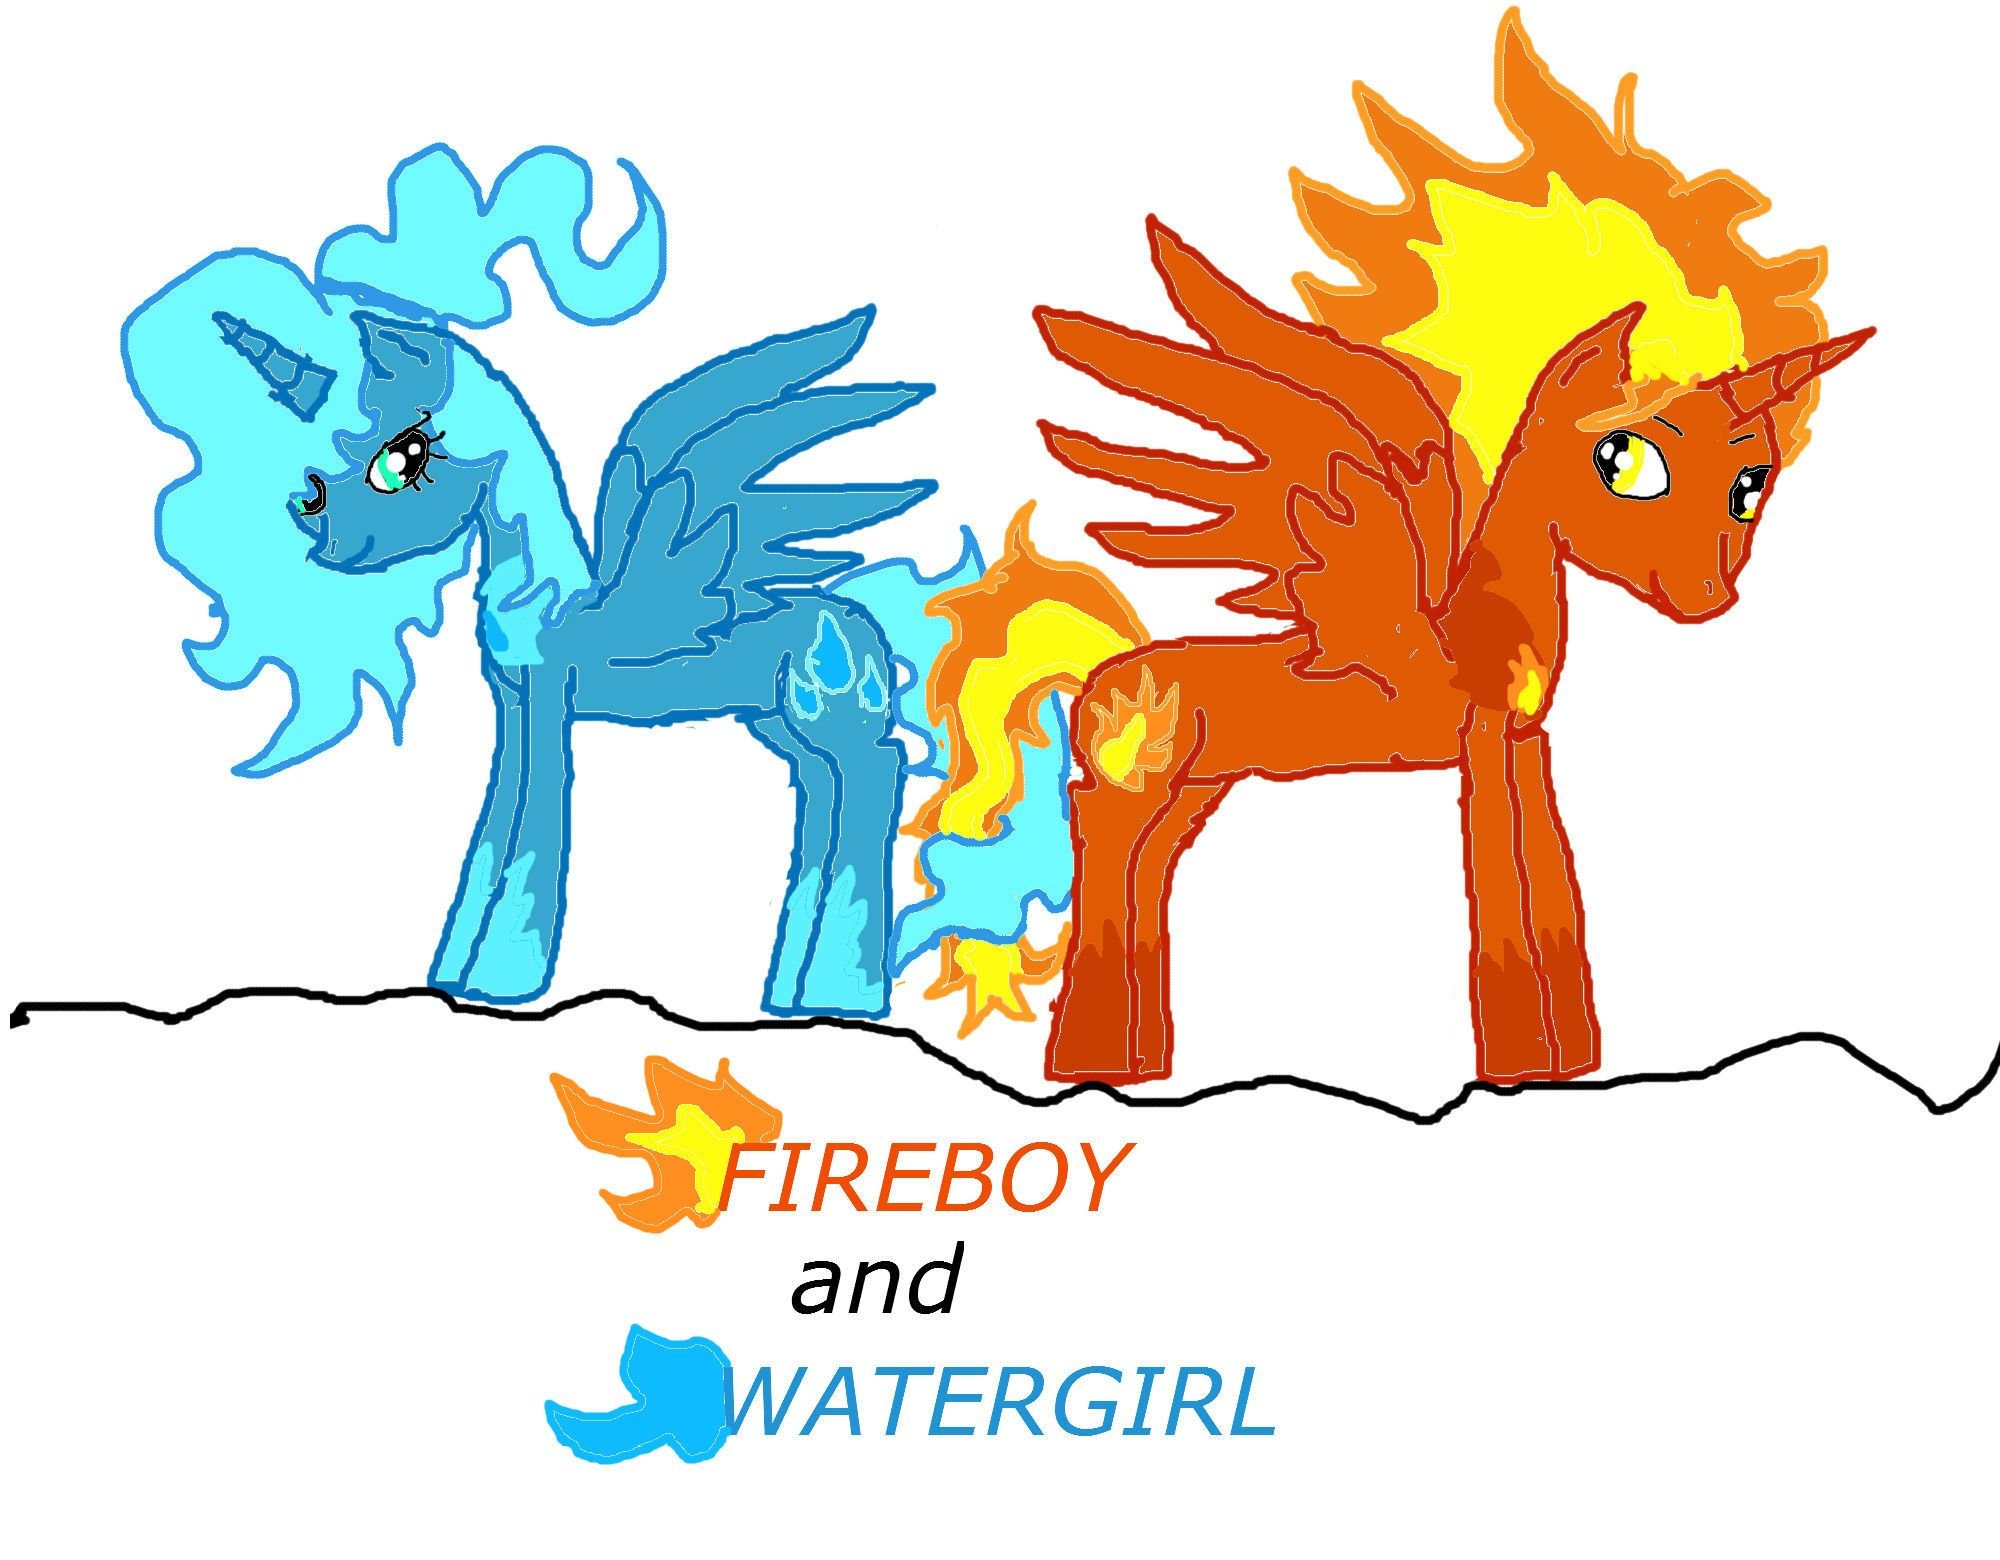 Fireboy and watergirl need to go through different levels to find their way...